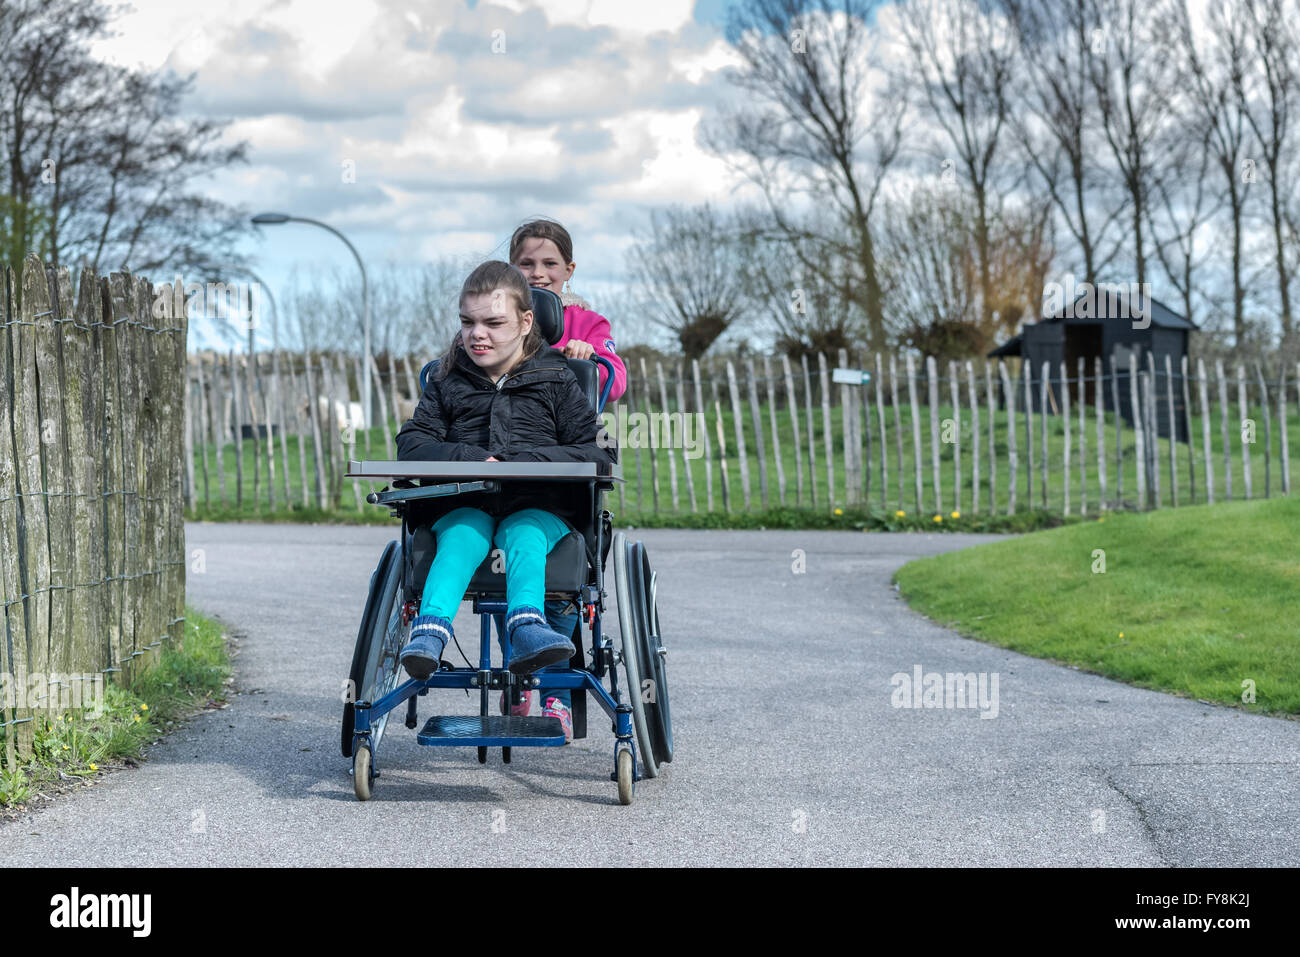 A disabled person in a wheelchair relaxing outside with her sister Stock Photo